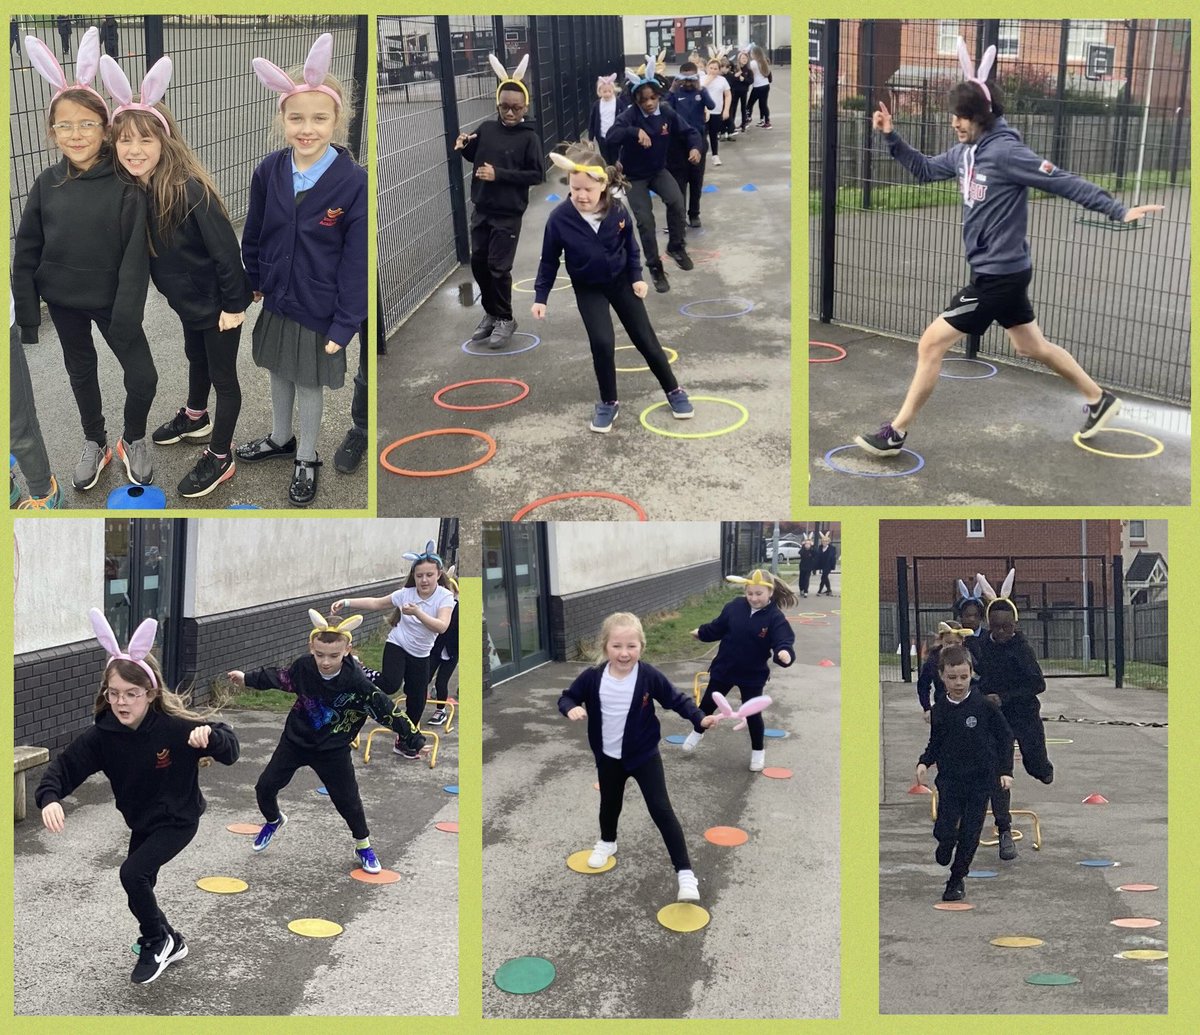 😍🐰 Here we are in action at the bunny hop this afternoon! 🐰😍 @Inspire_Ashton @TrustVictorious @inspire_pe